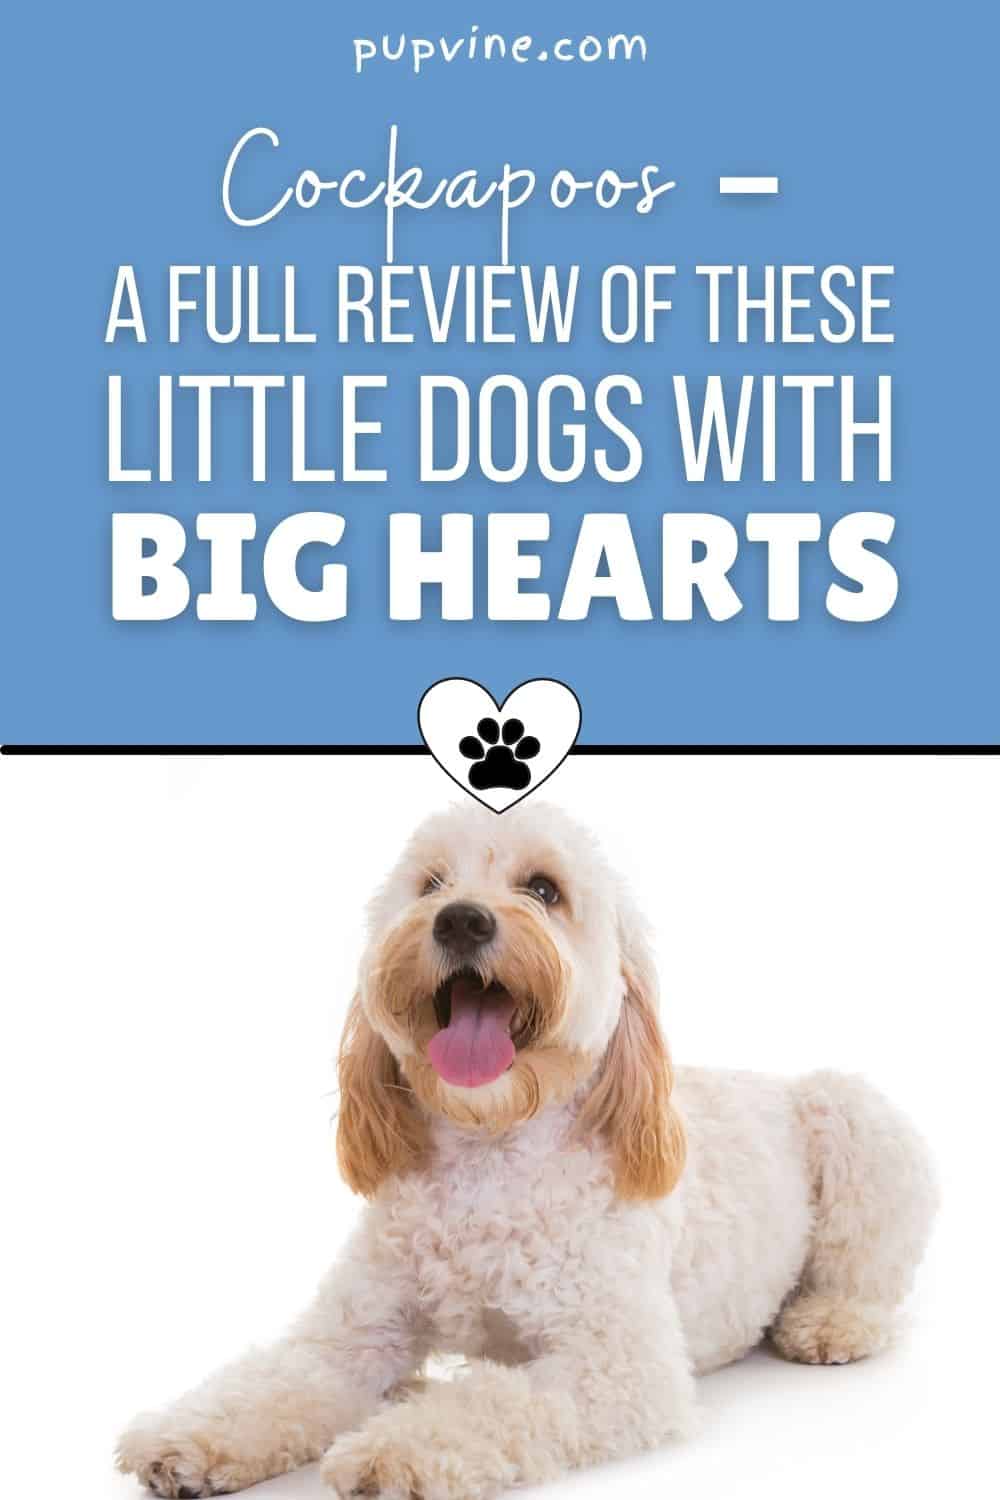 Cockapoos – A Full Review Of These Little Dogs With Big Hearts